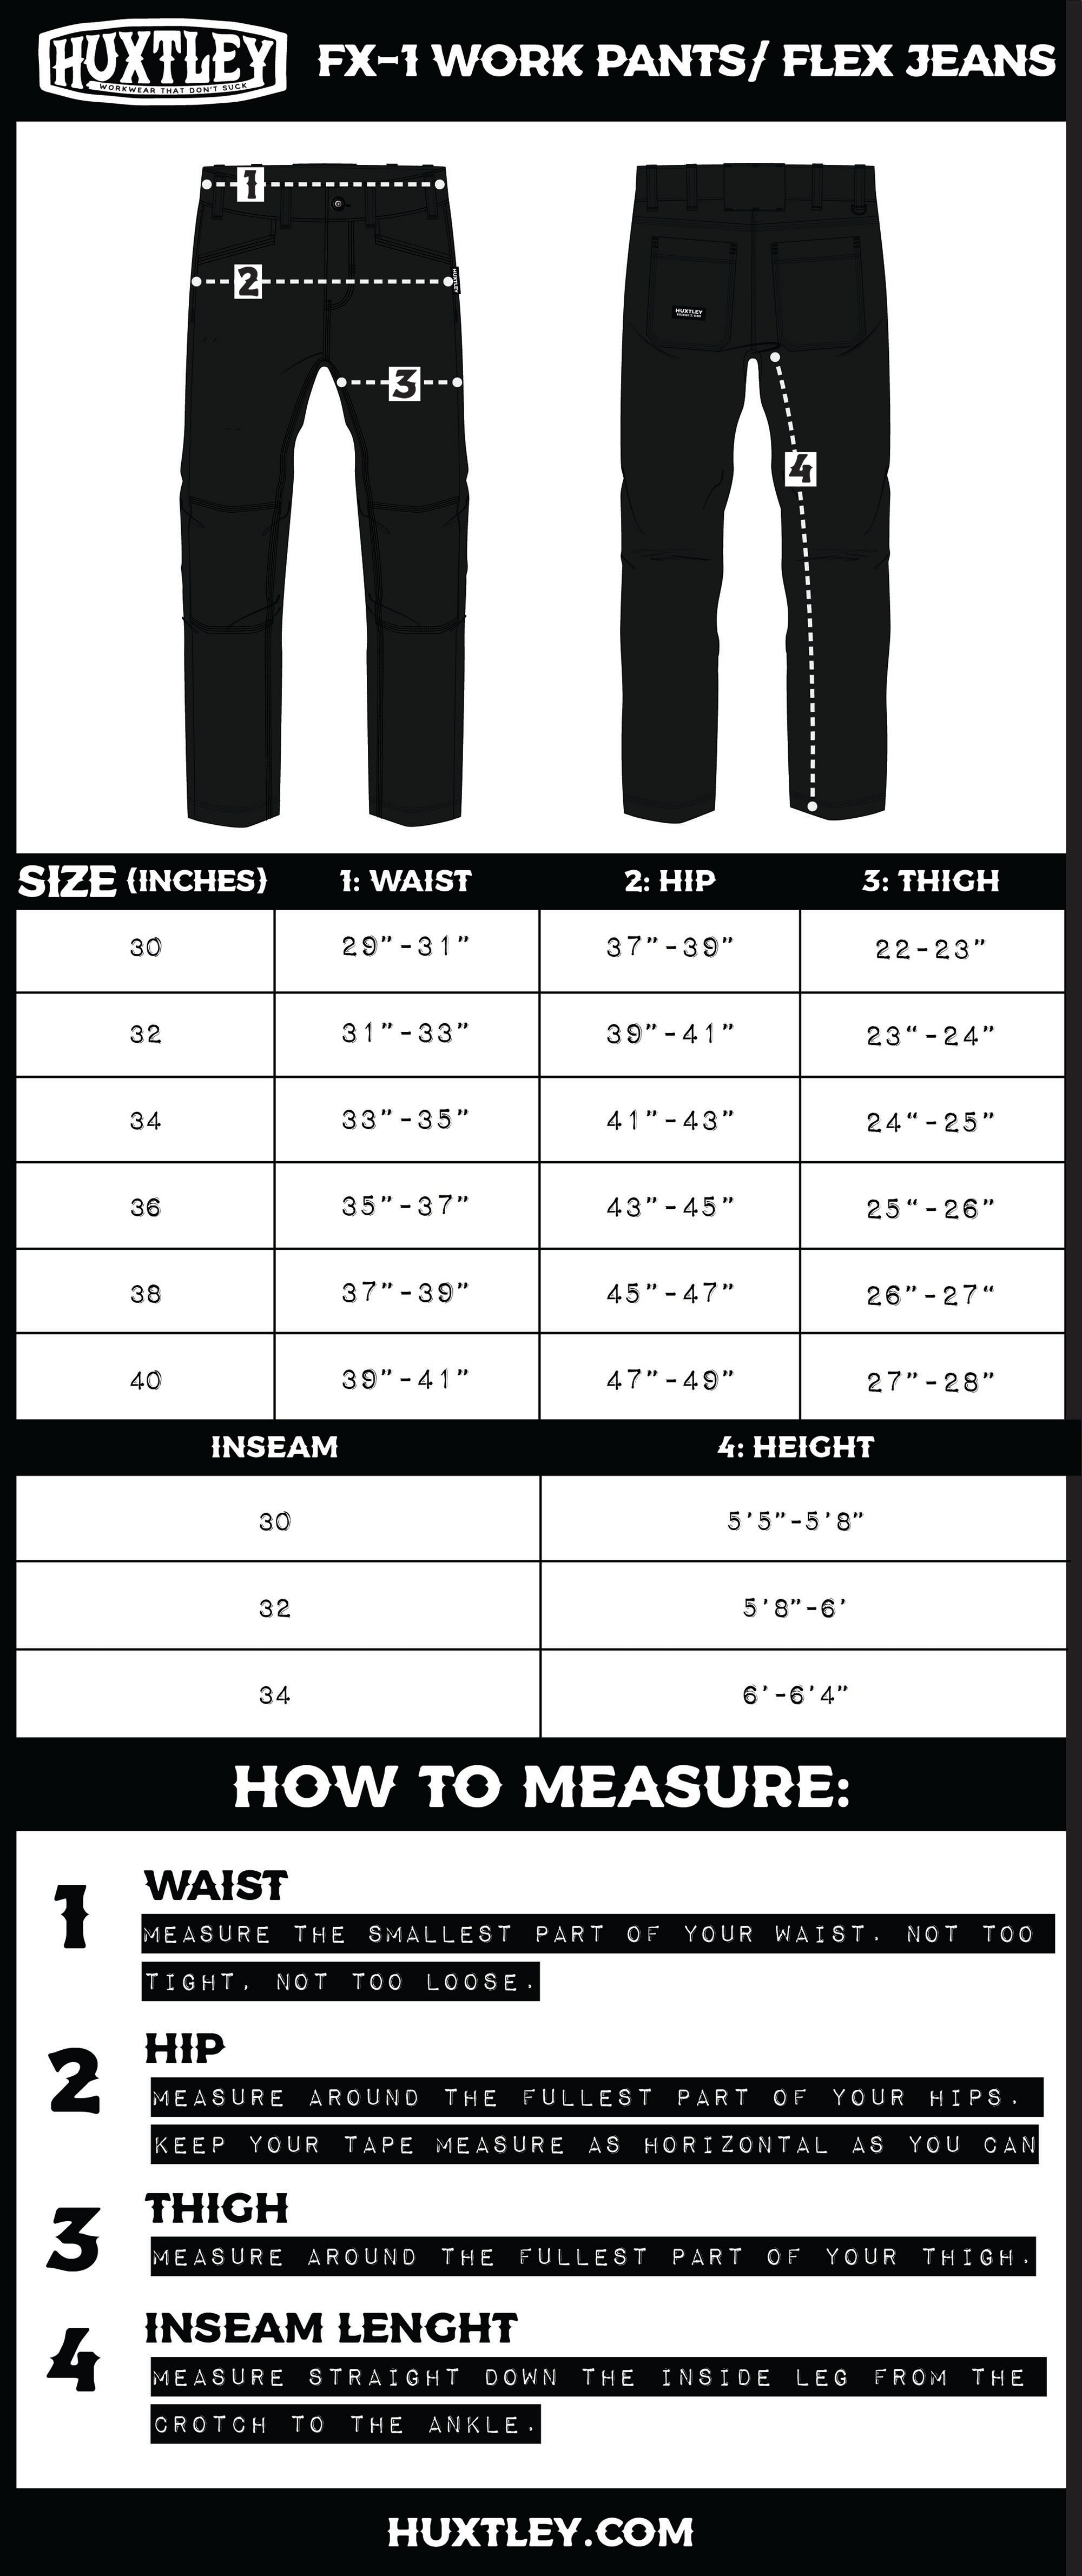 FX-1 WORK PANTS FLEX JEANS SIZING GUIDE SIZE CHART